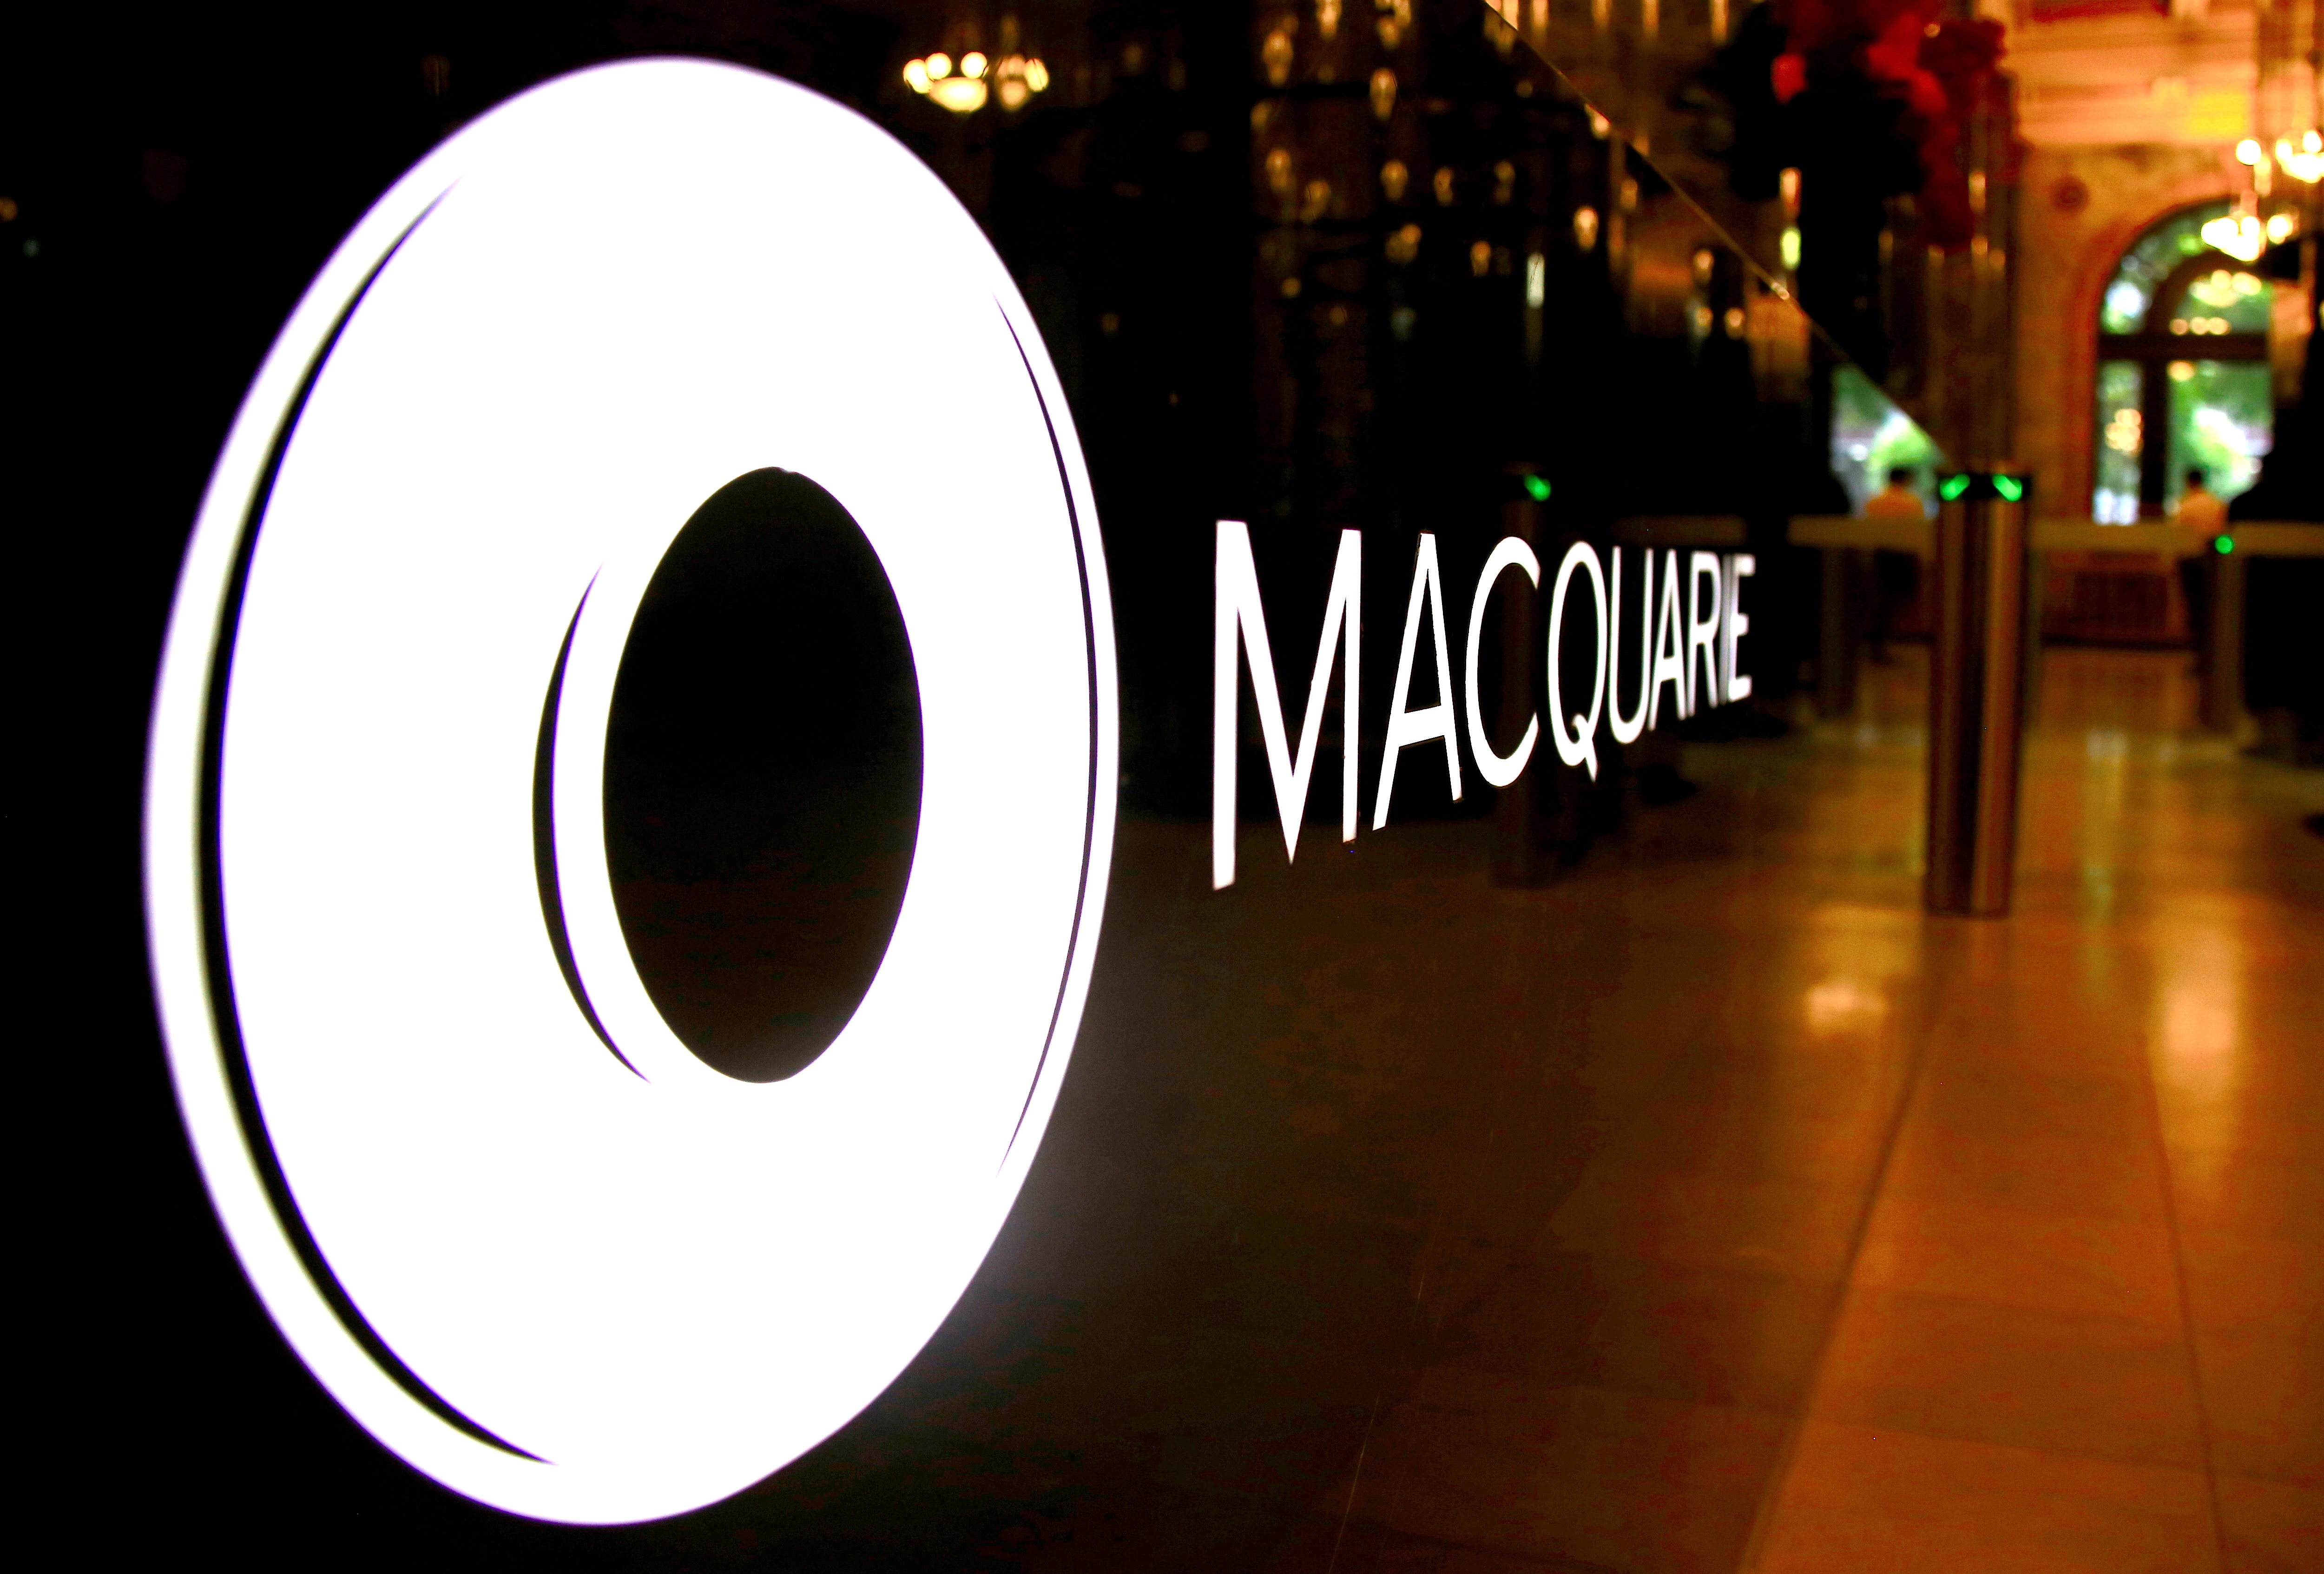 The logo of Australia's biggest investment bank Macquarie Group Ltd adorns a desk in the reception area of its Sydney office headquarters in Australia, Oct. 28, 2016. REUTERS/David Gray/File Photo